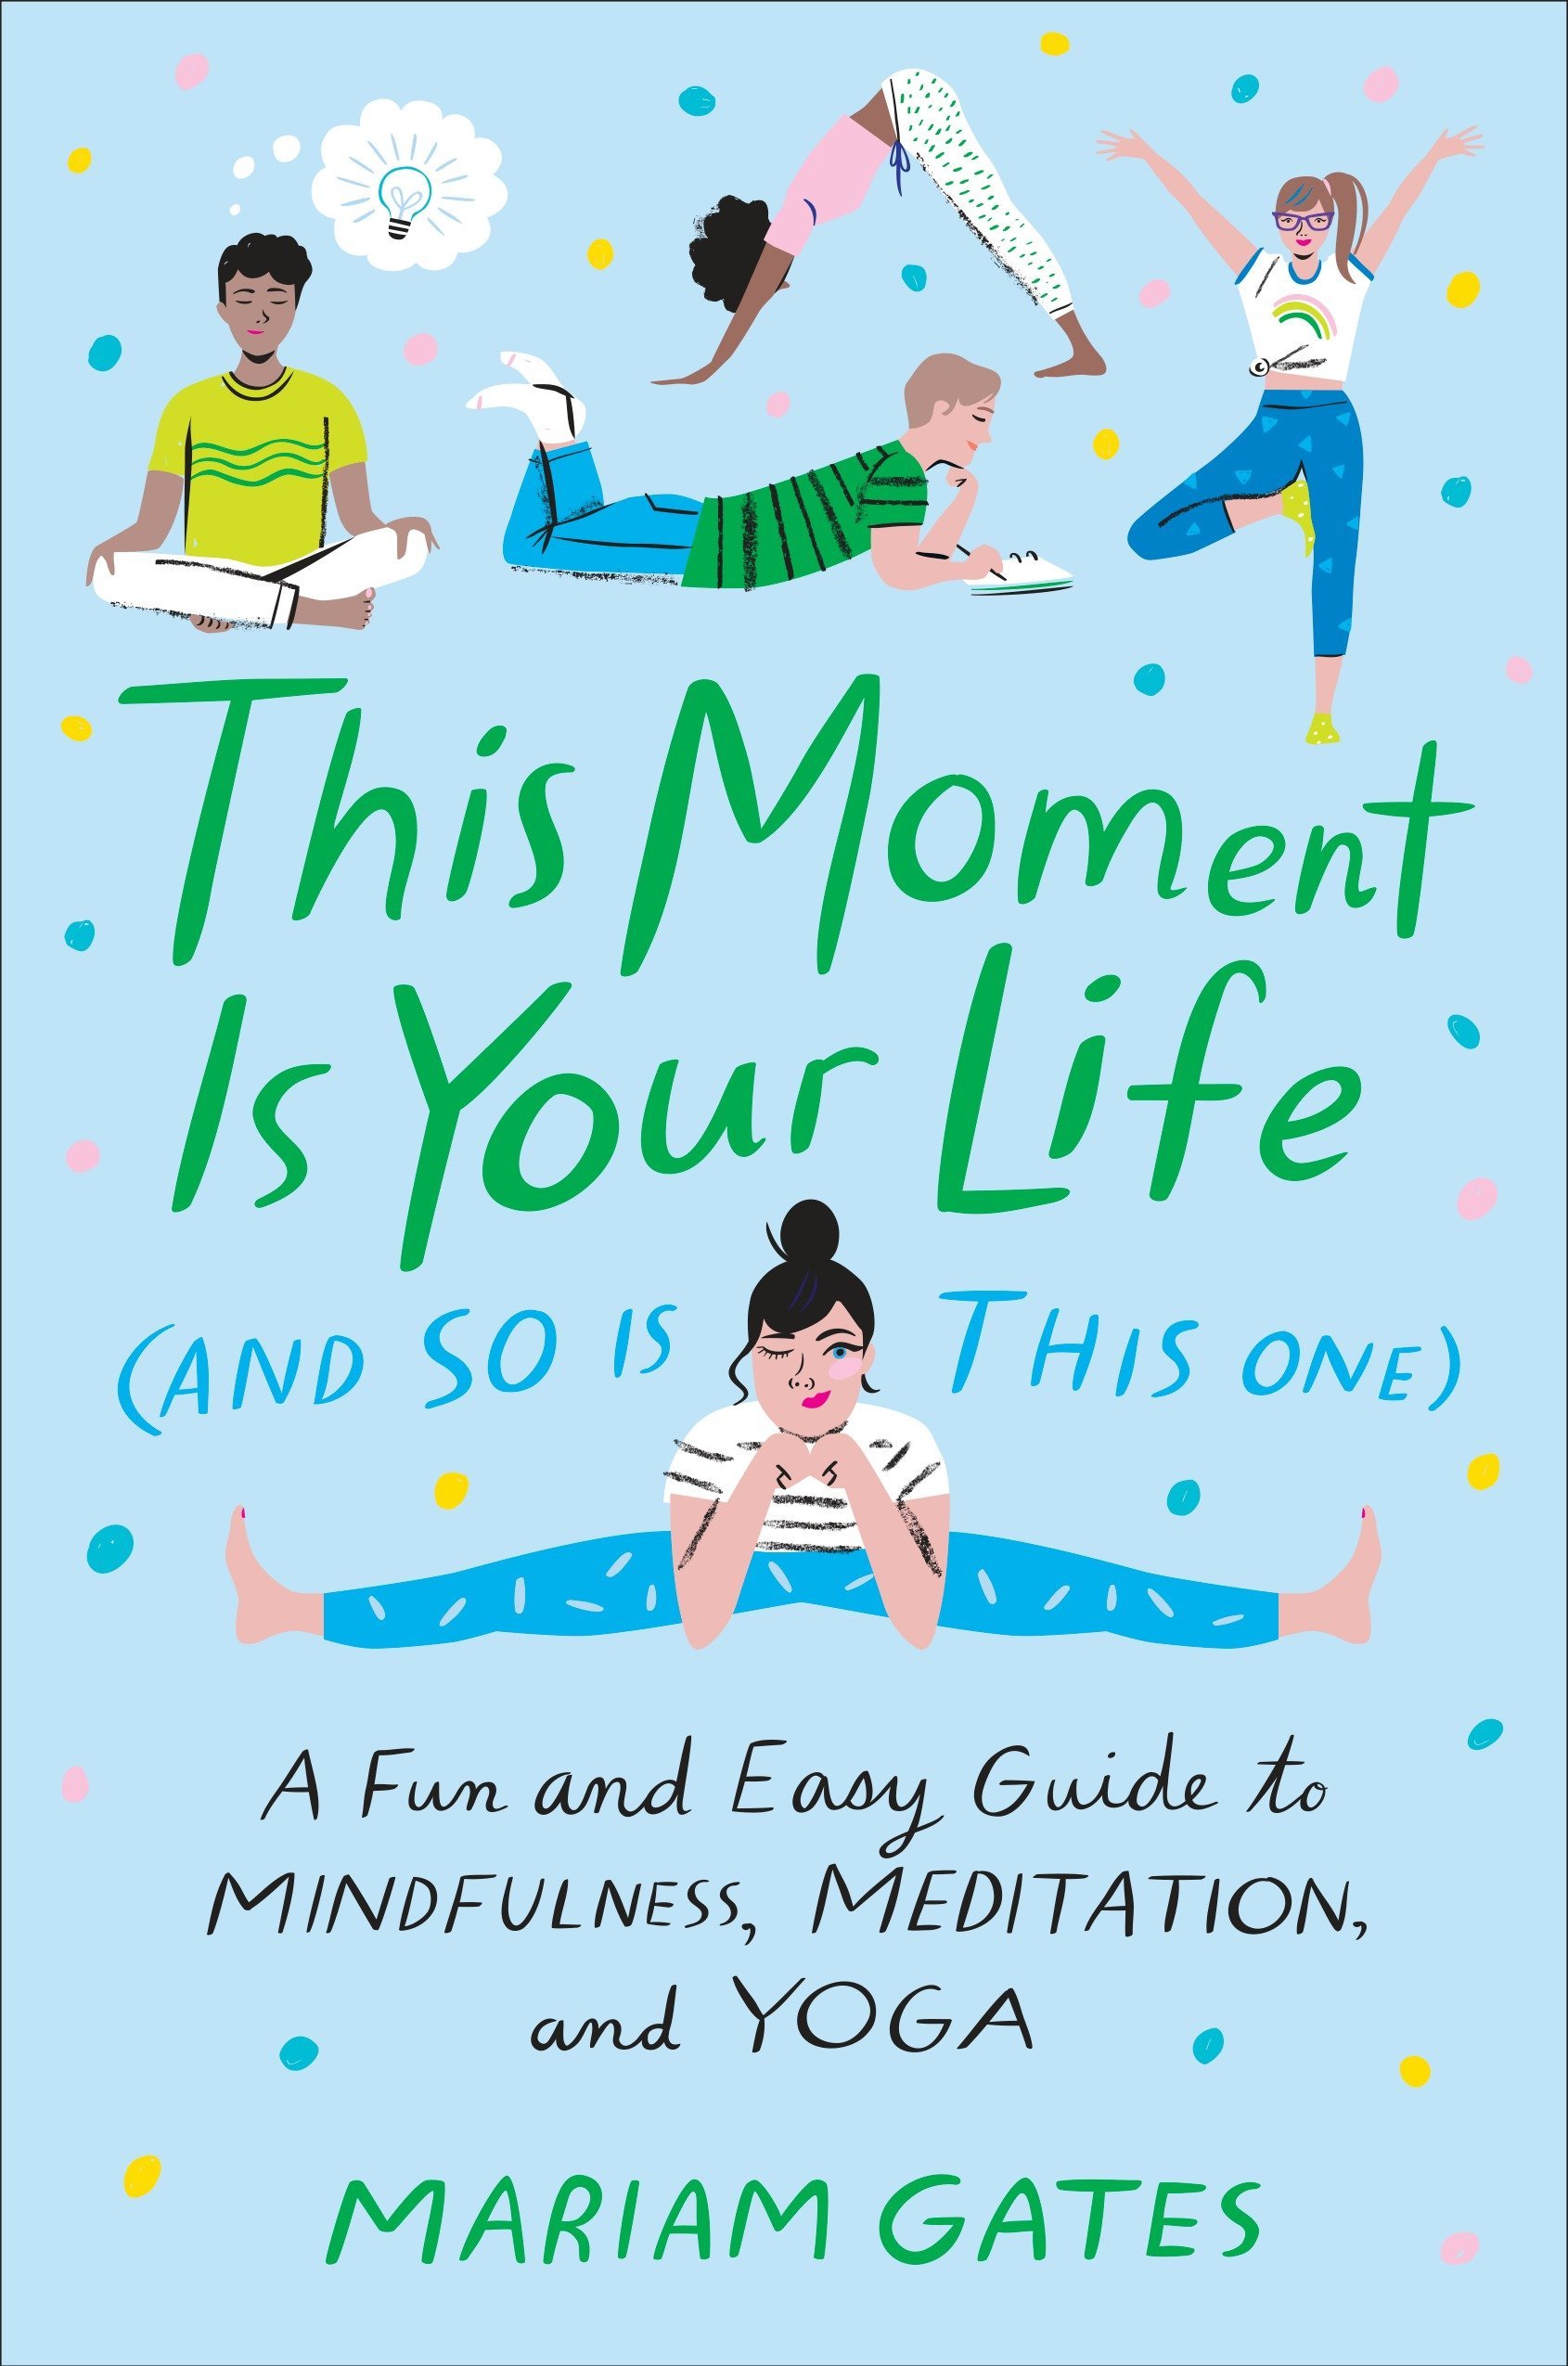 This Moment Is Your Life (and So Is This One): A Fun and Easy Guide to Mindfulness, Meditation, and Yoga by Mariam Gates